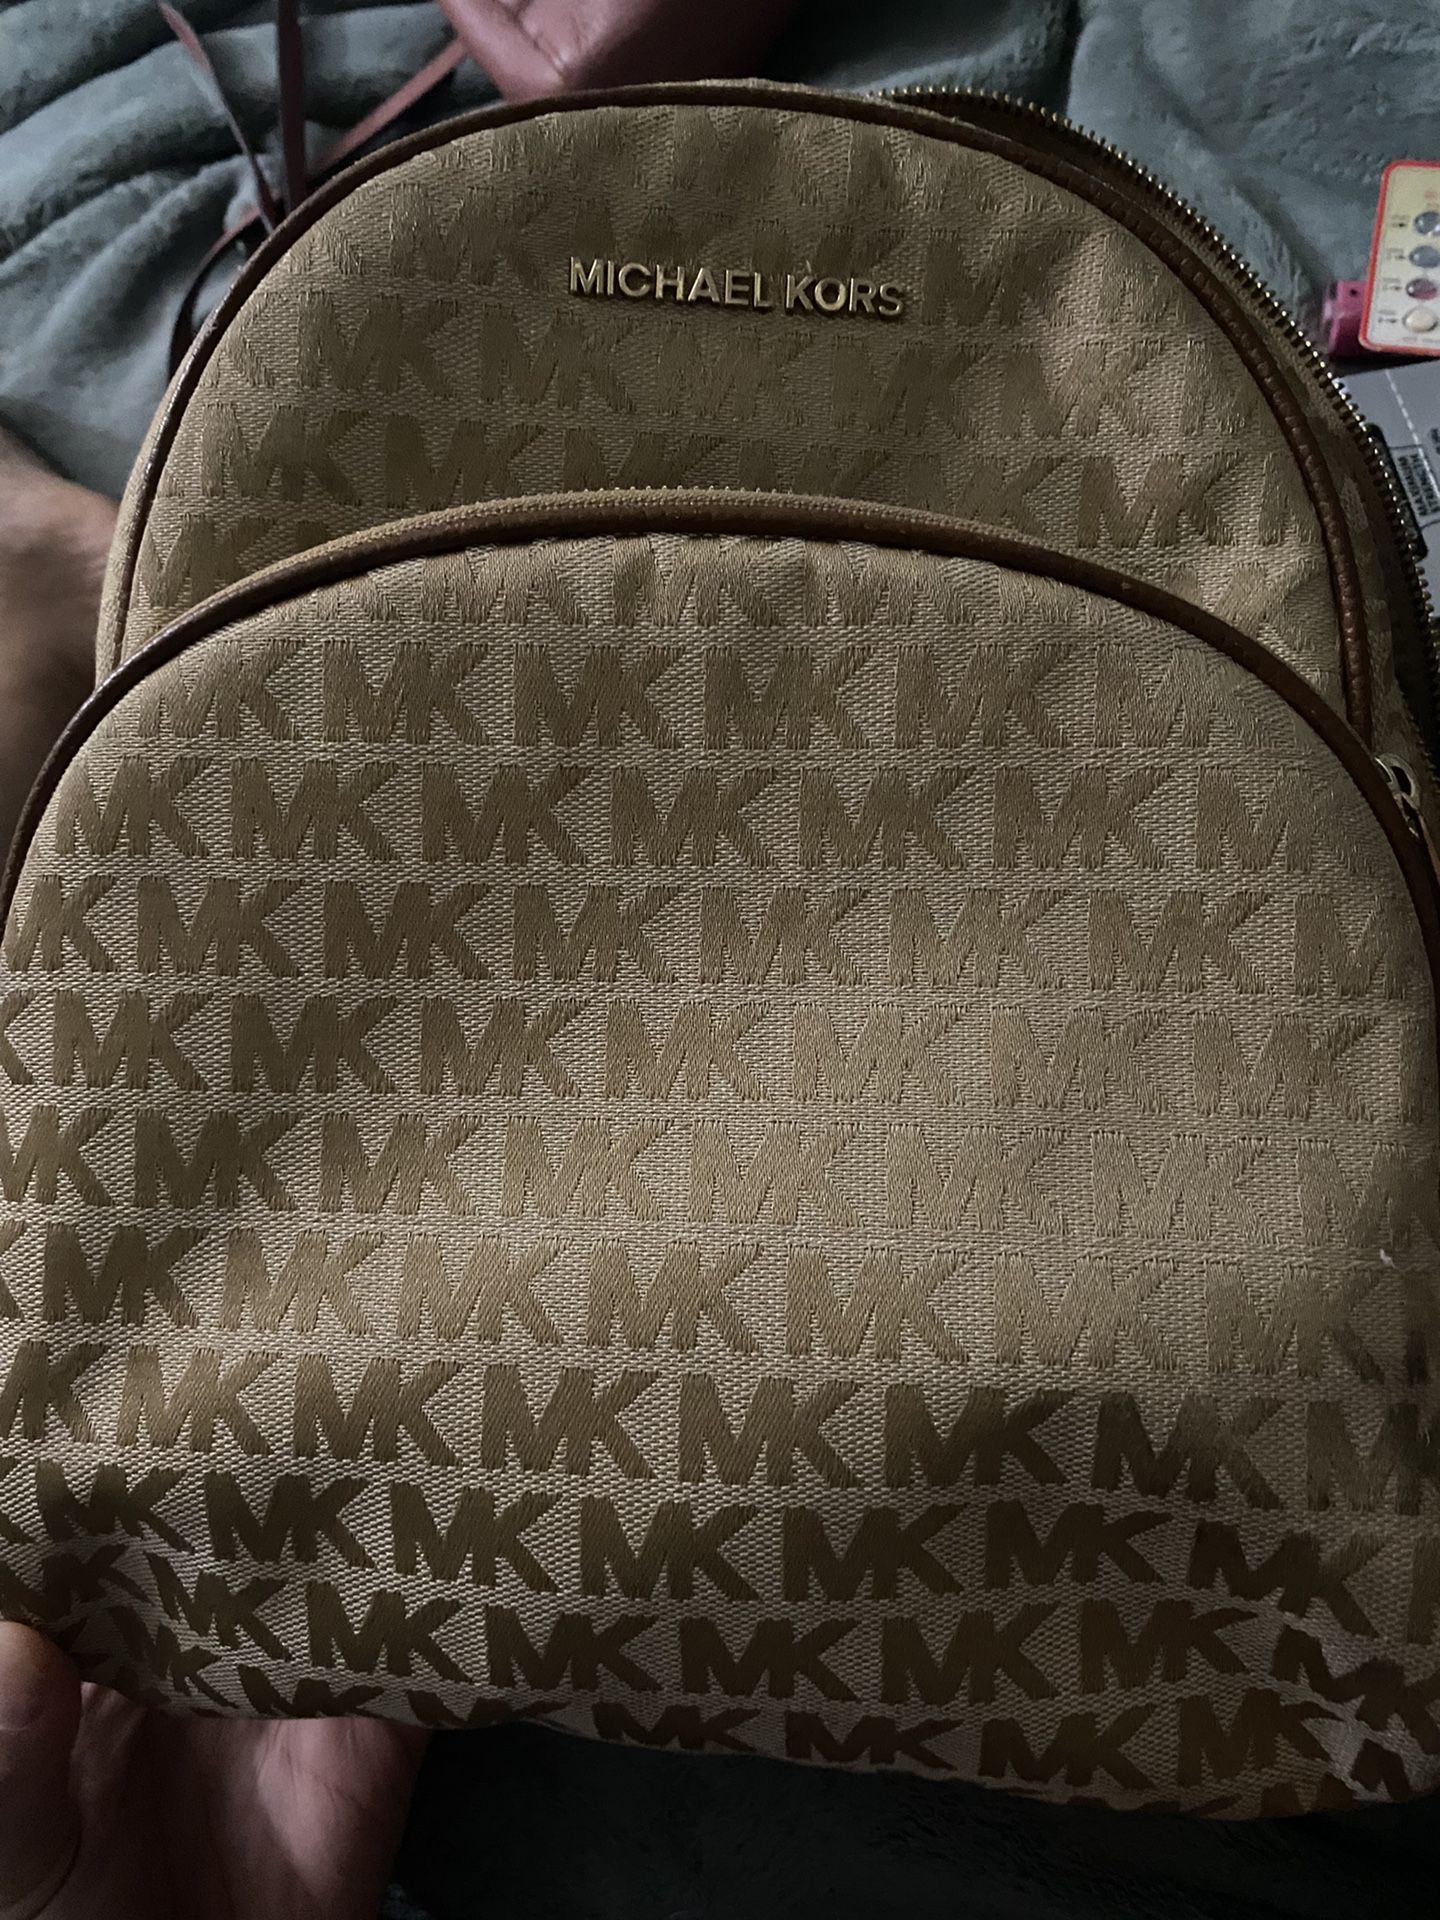 Used LOUIS VUITTON Duffle Bag for Sale in Mesa, AZ - OfferUp